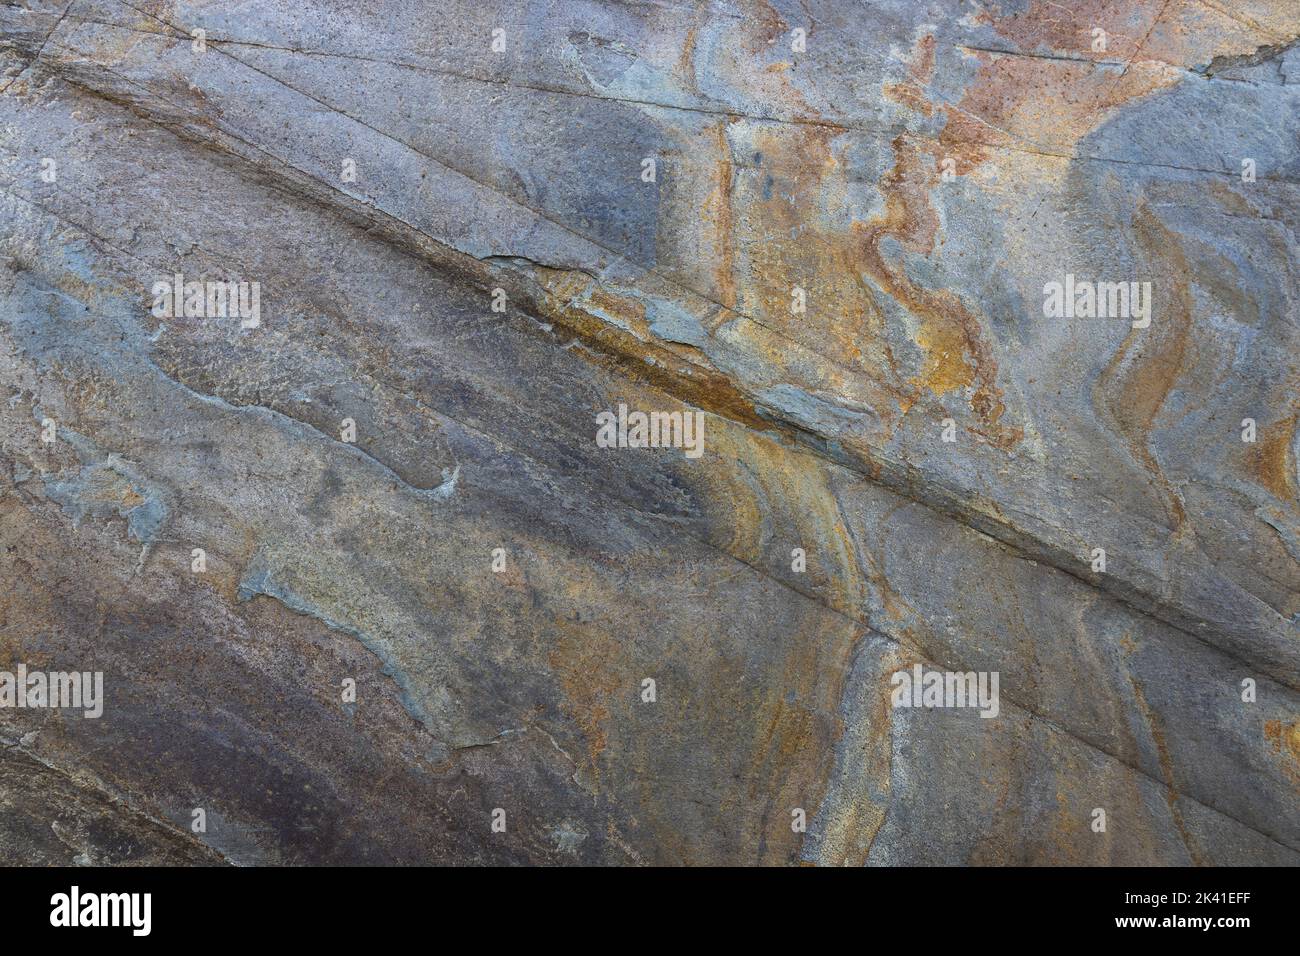 Rusty metal background with corrosion and deep crack on the texture of the surface Stock Photo